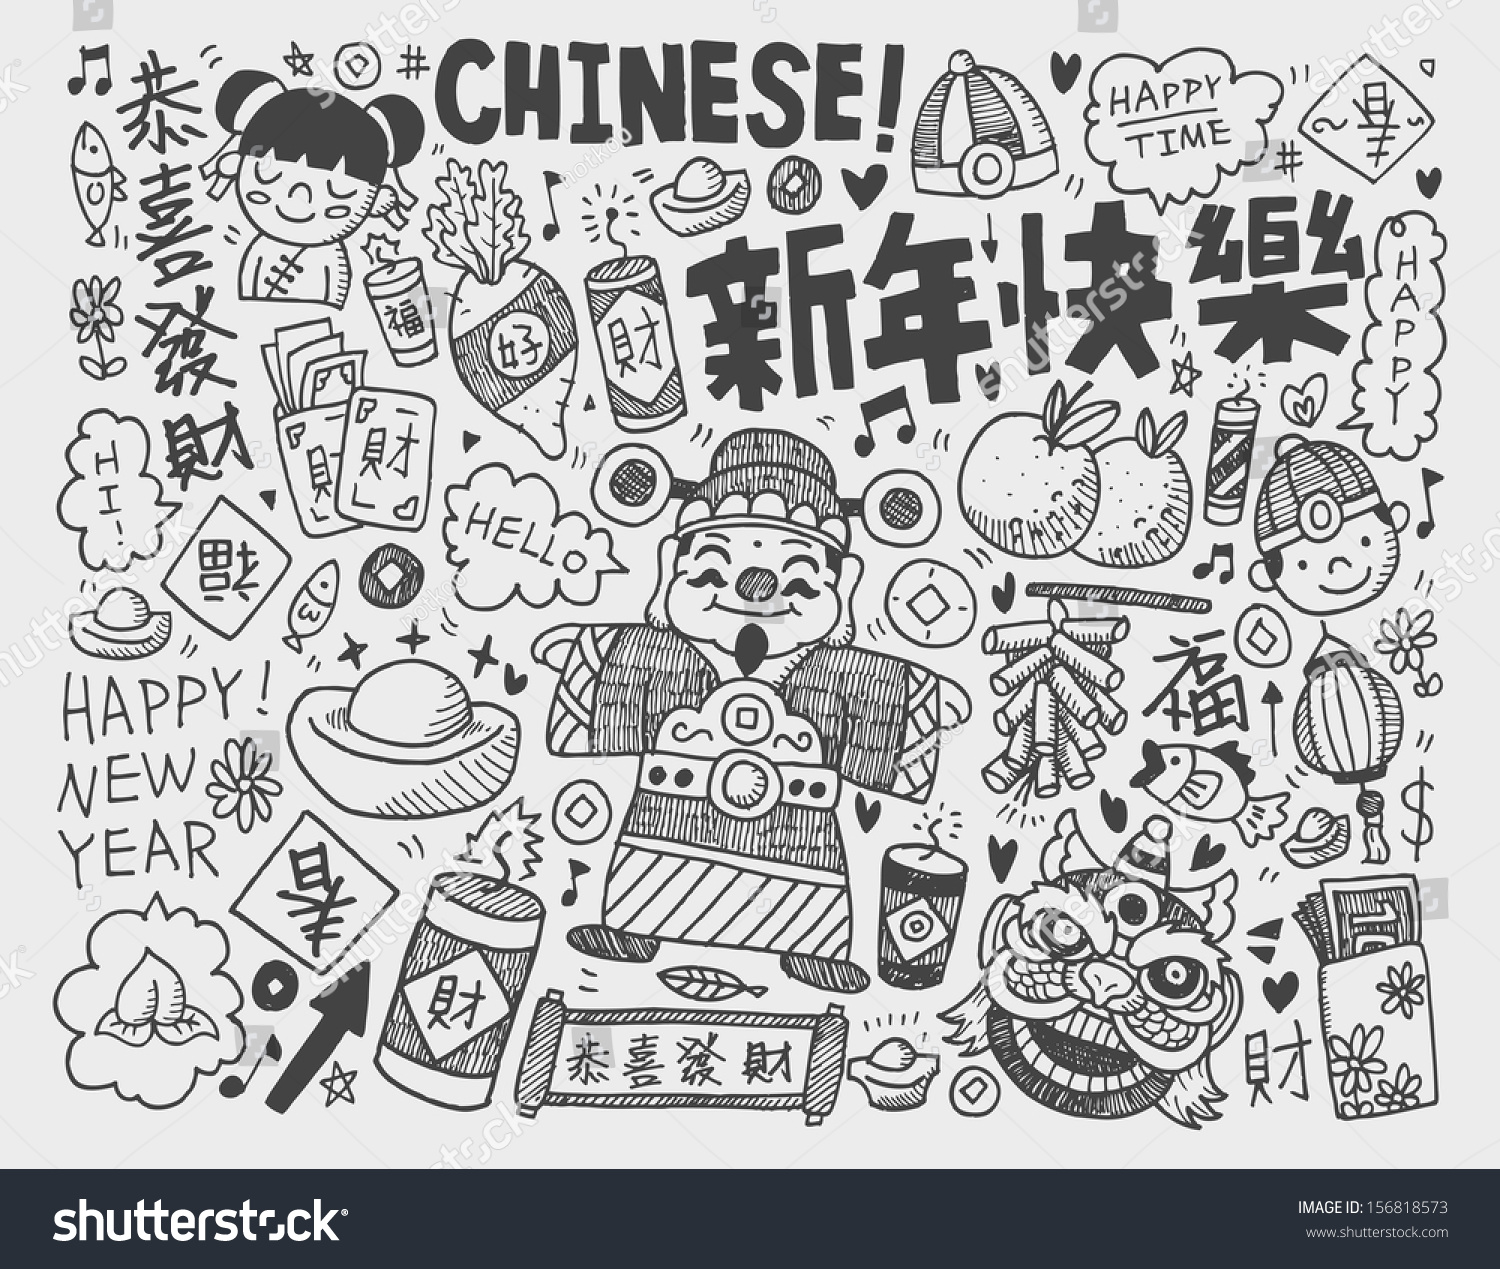 Royalty Free Doodle Chinese New Year Background 156818573 Stock